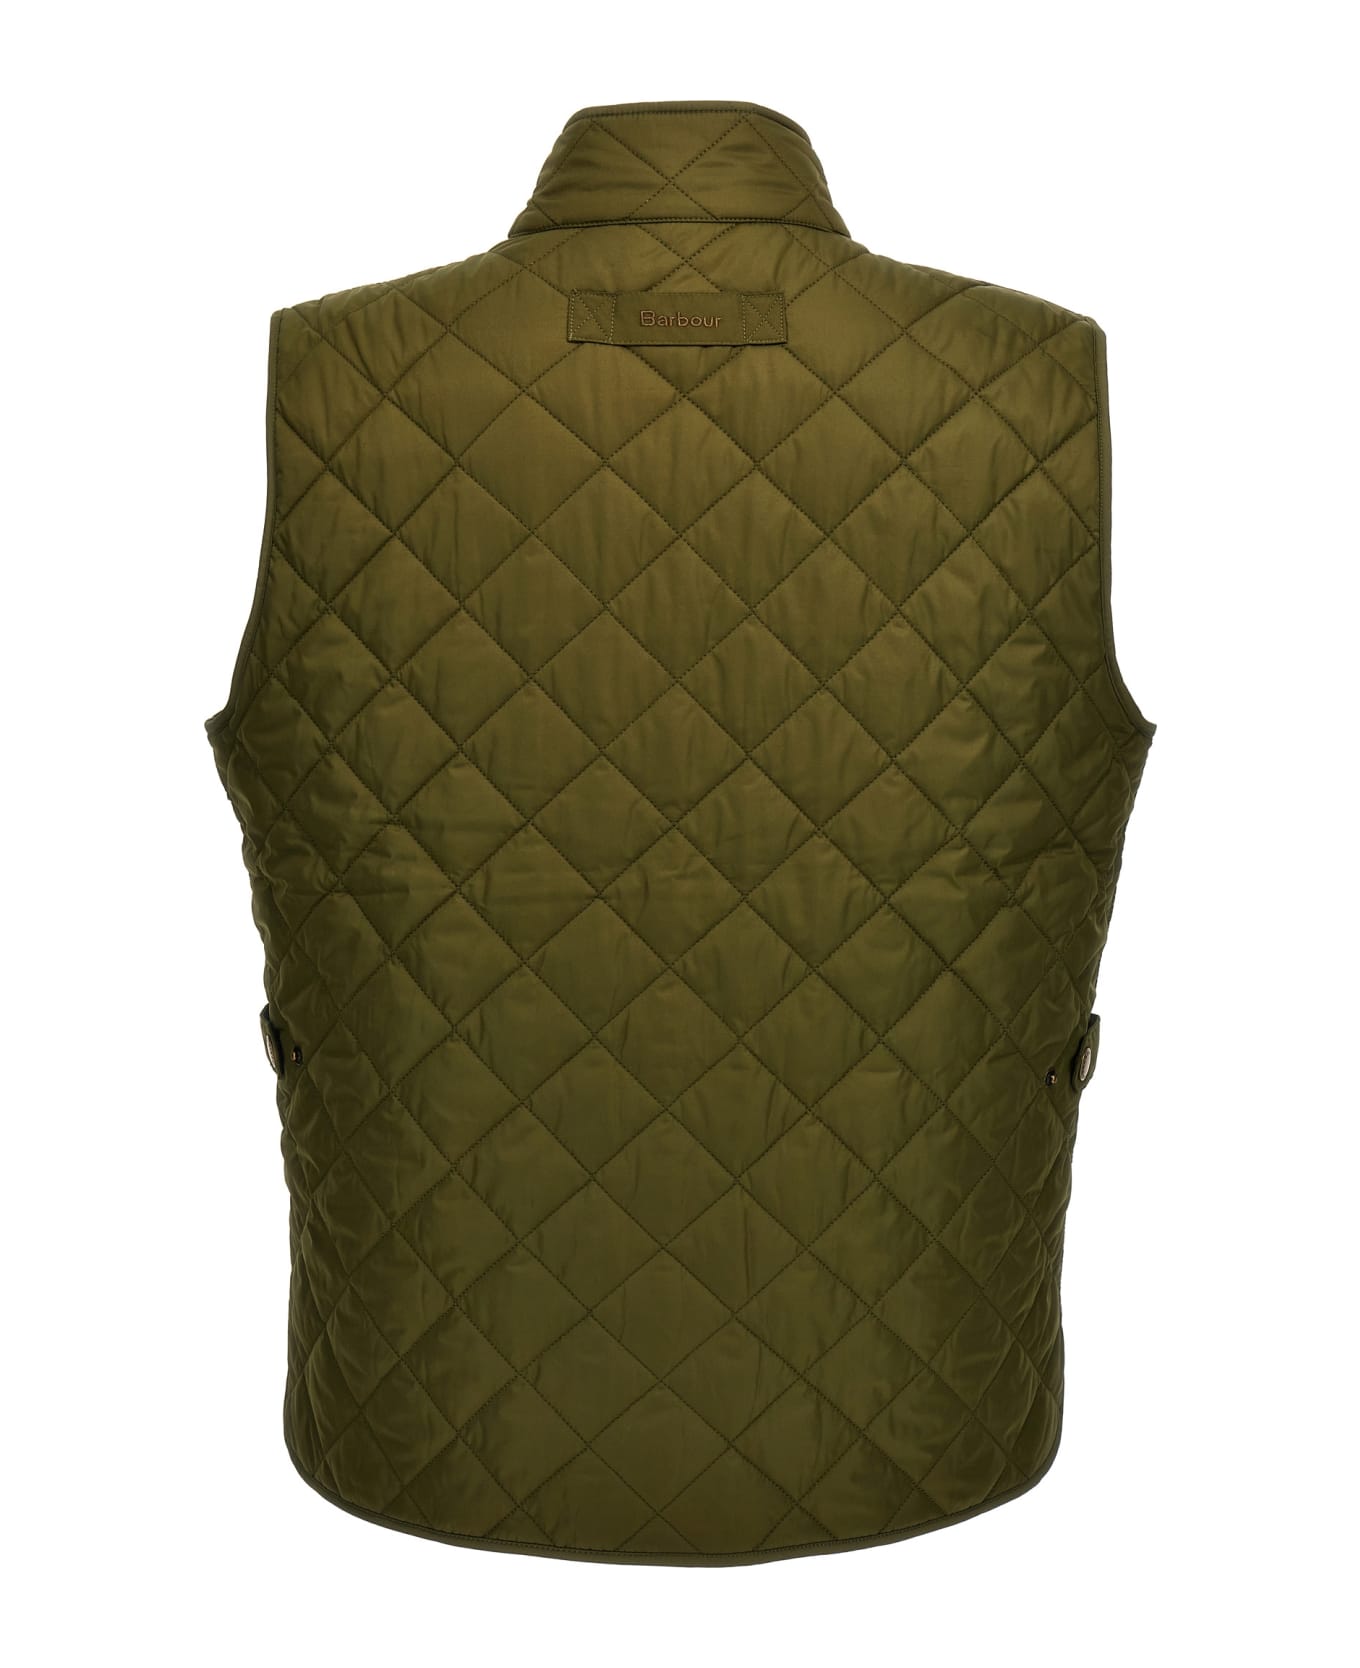 Barbour 'new Lowerdale' Vest - Green